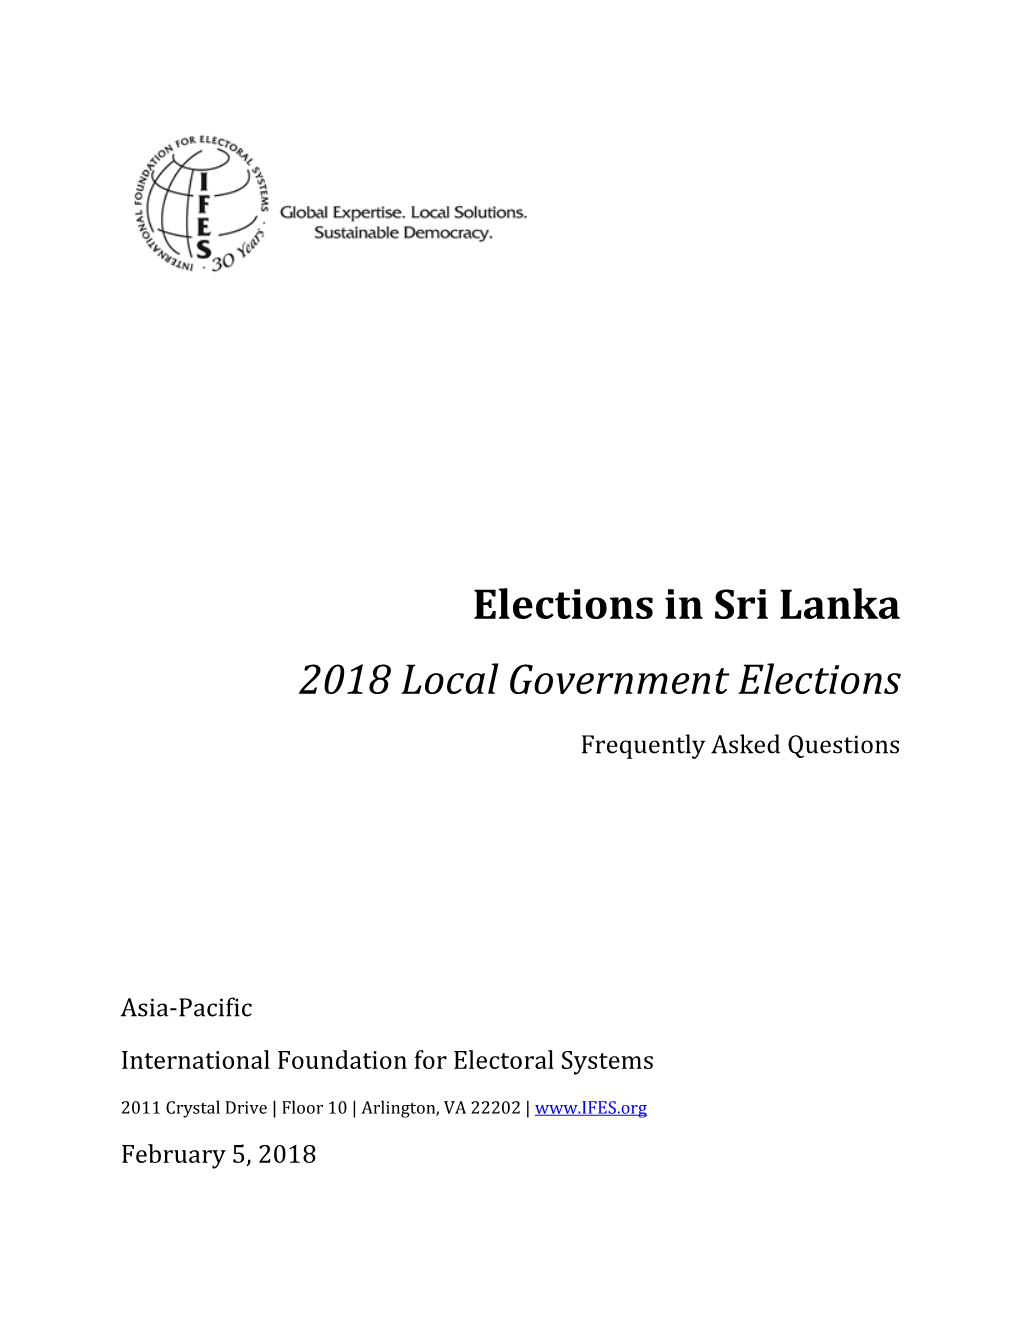 IFES Faqs on Elections in Sri Lanka: 2018 Local Government Elections